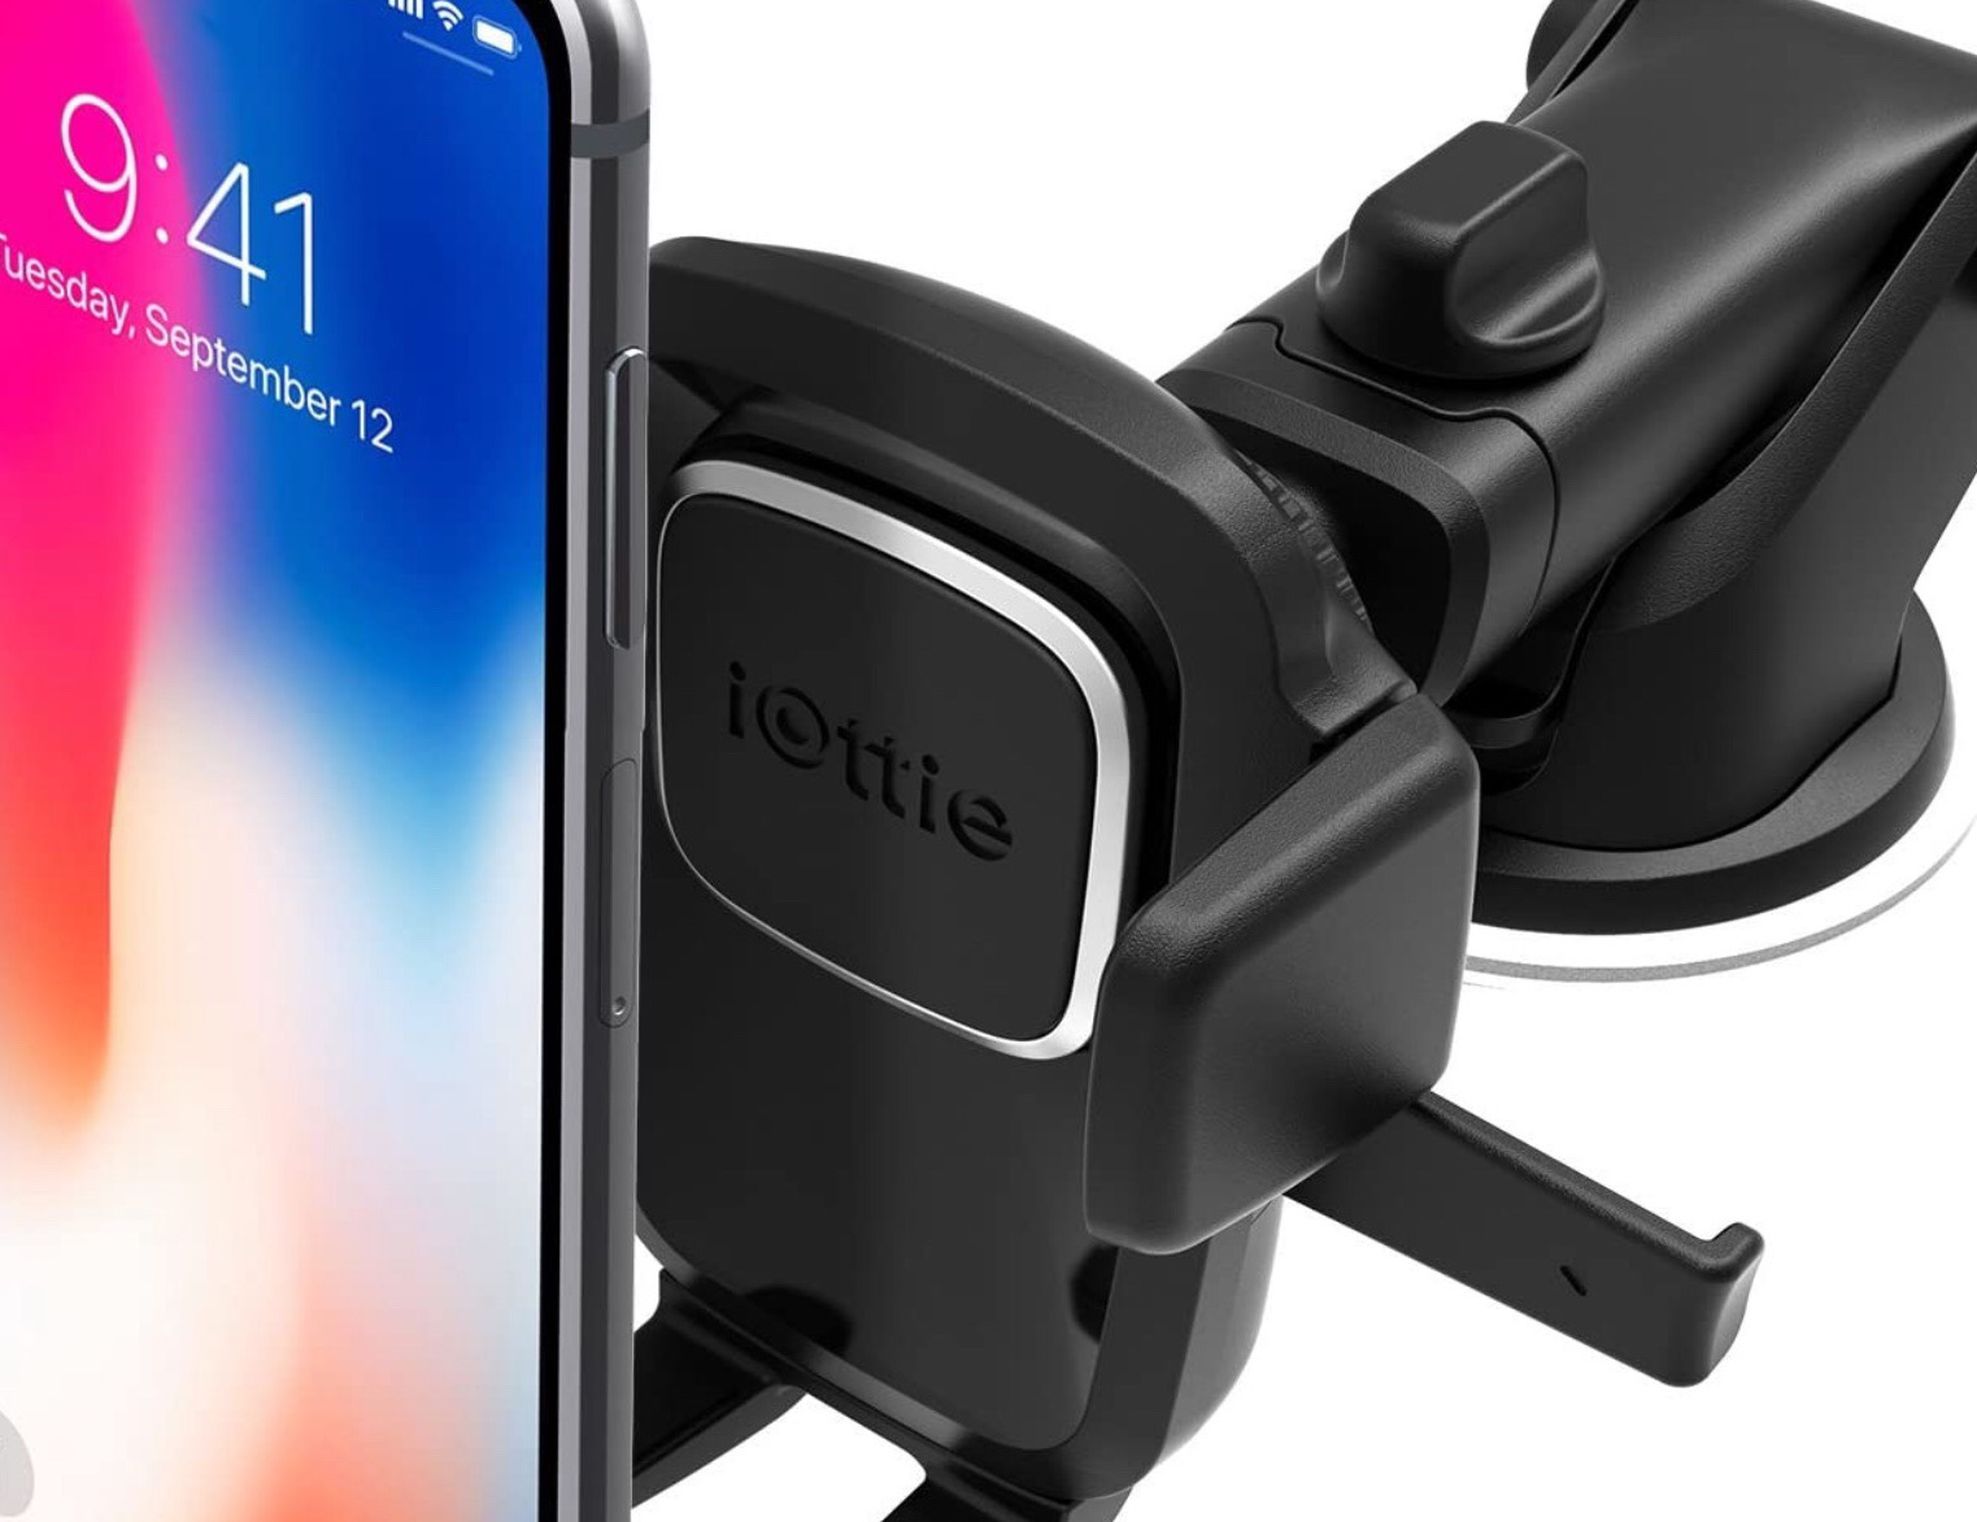 iOttie Easy One Touch 4 Dash & Windshield Car Mount Phone Holder Desk Stand Pad & Mat for iPhone, Samsung, Moto, Huawei, Nokia, LG, Smartphones